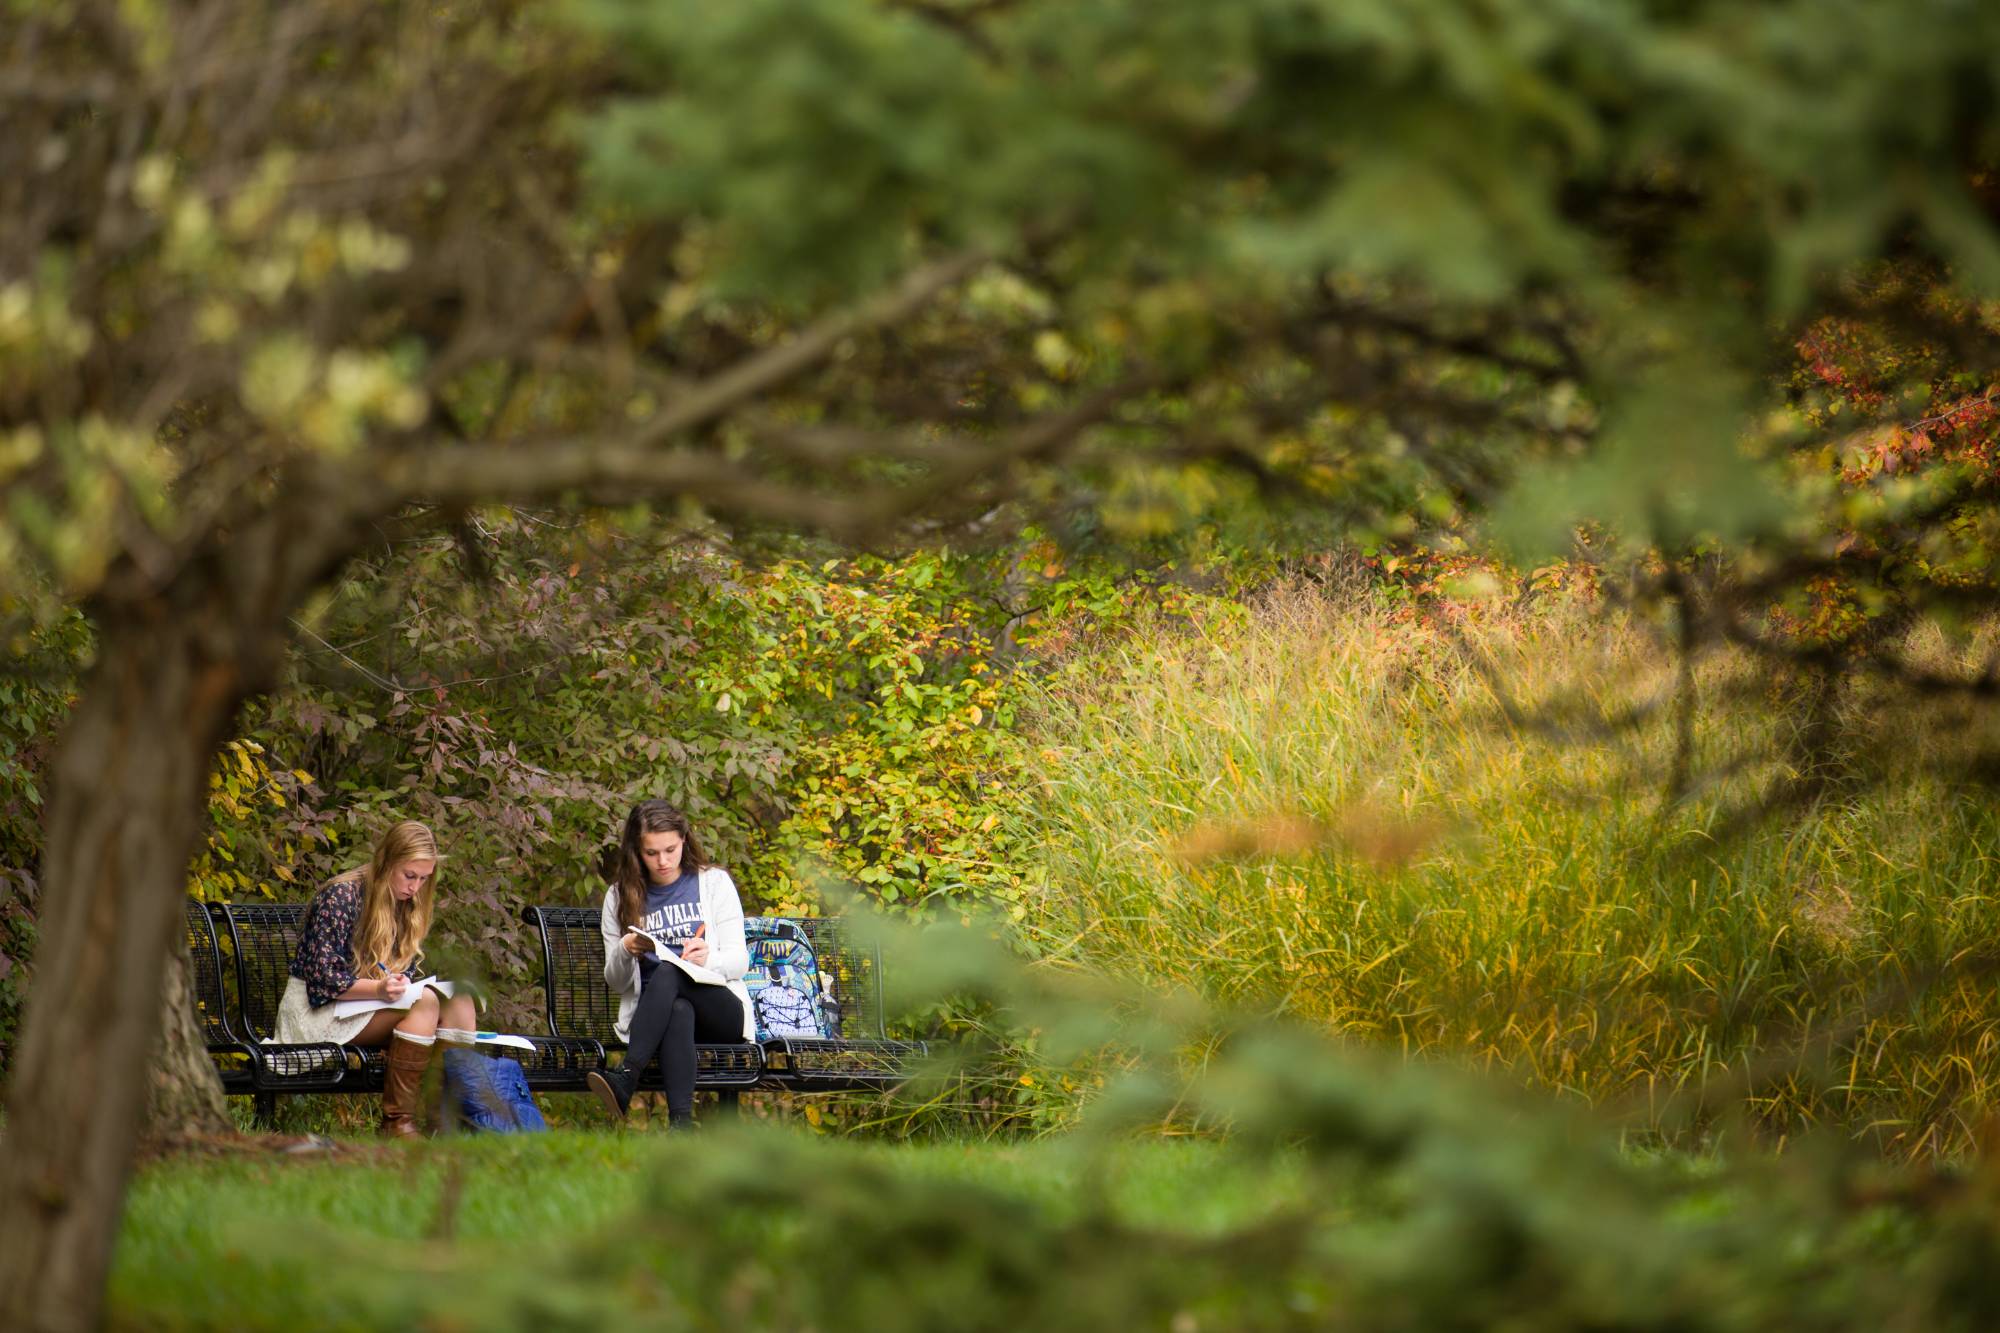 2 students studying on an outdoor bench